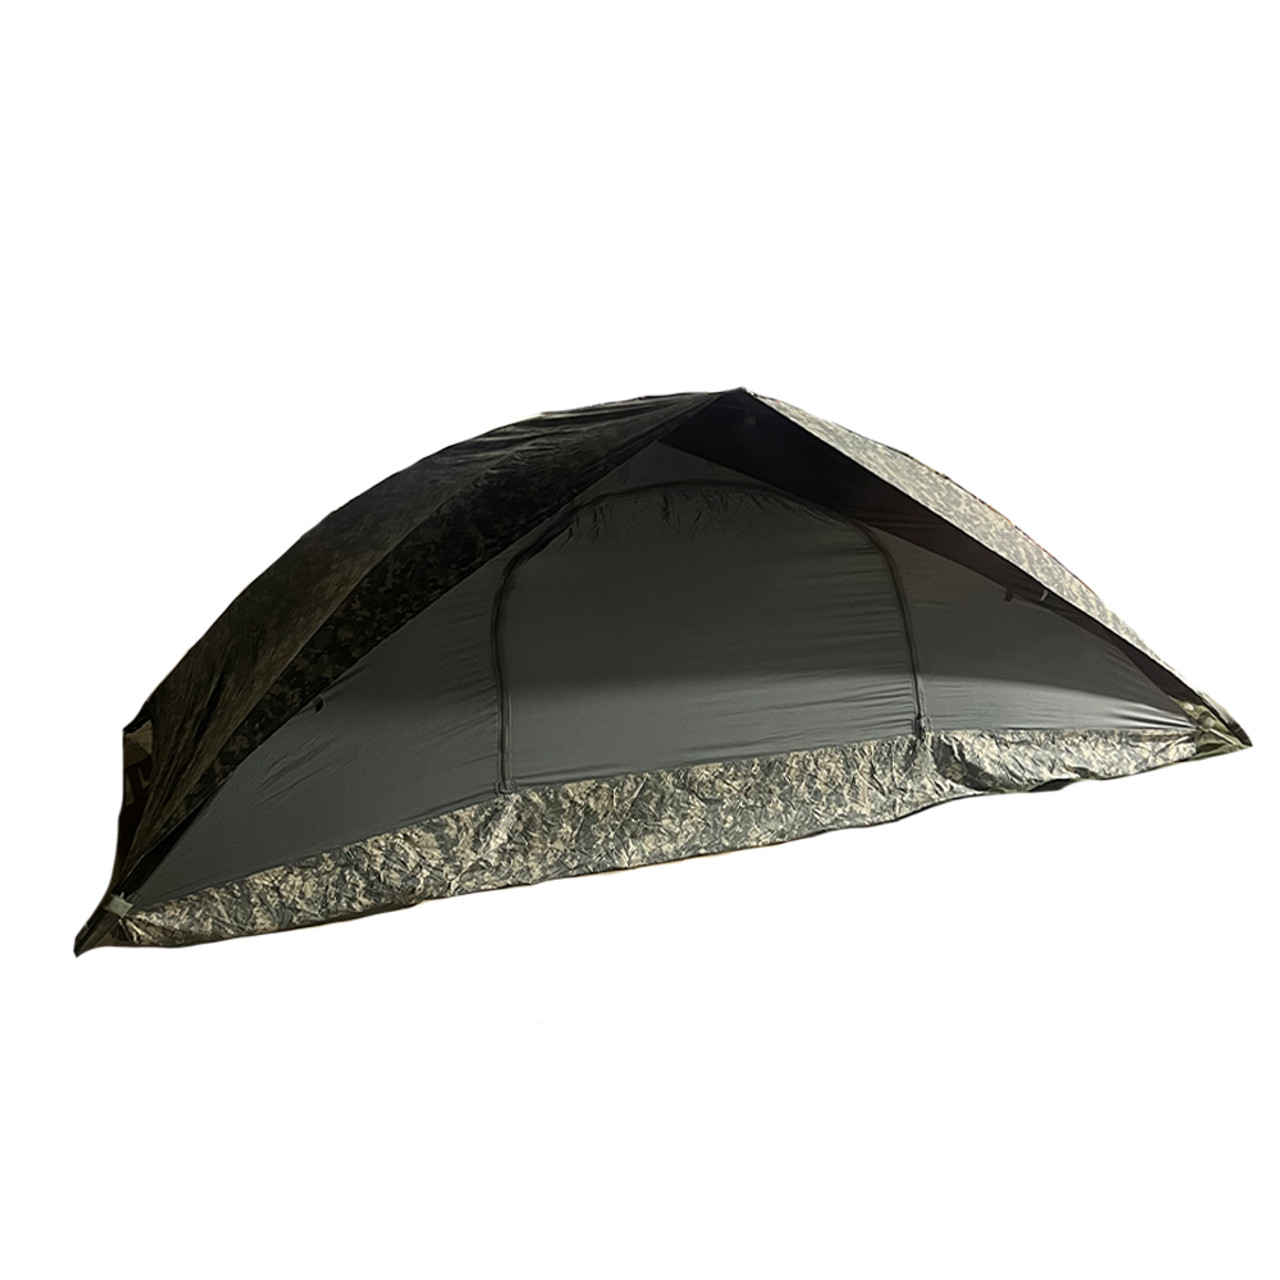 Military ACU Improved Combat Tent with Rainfly